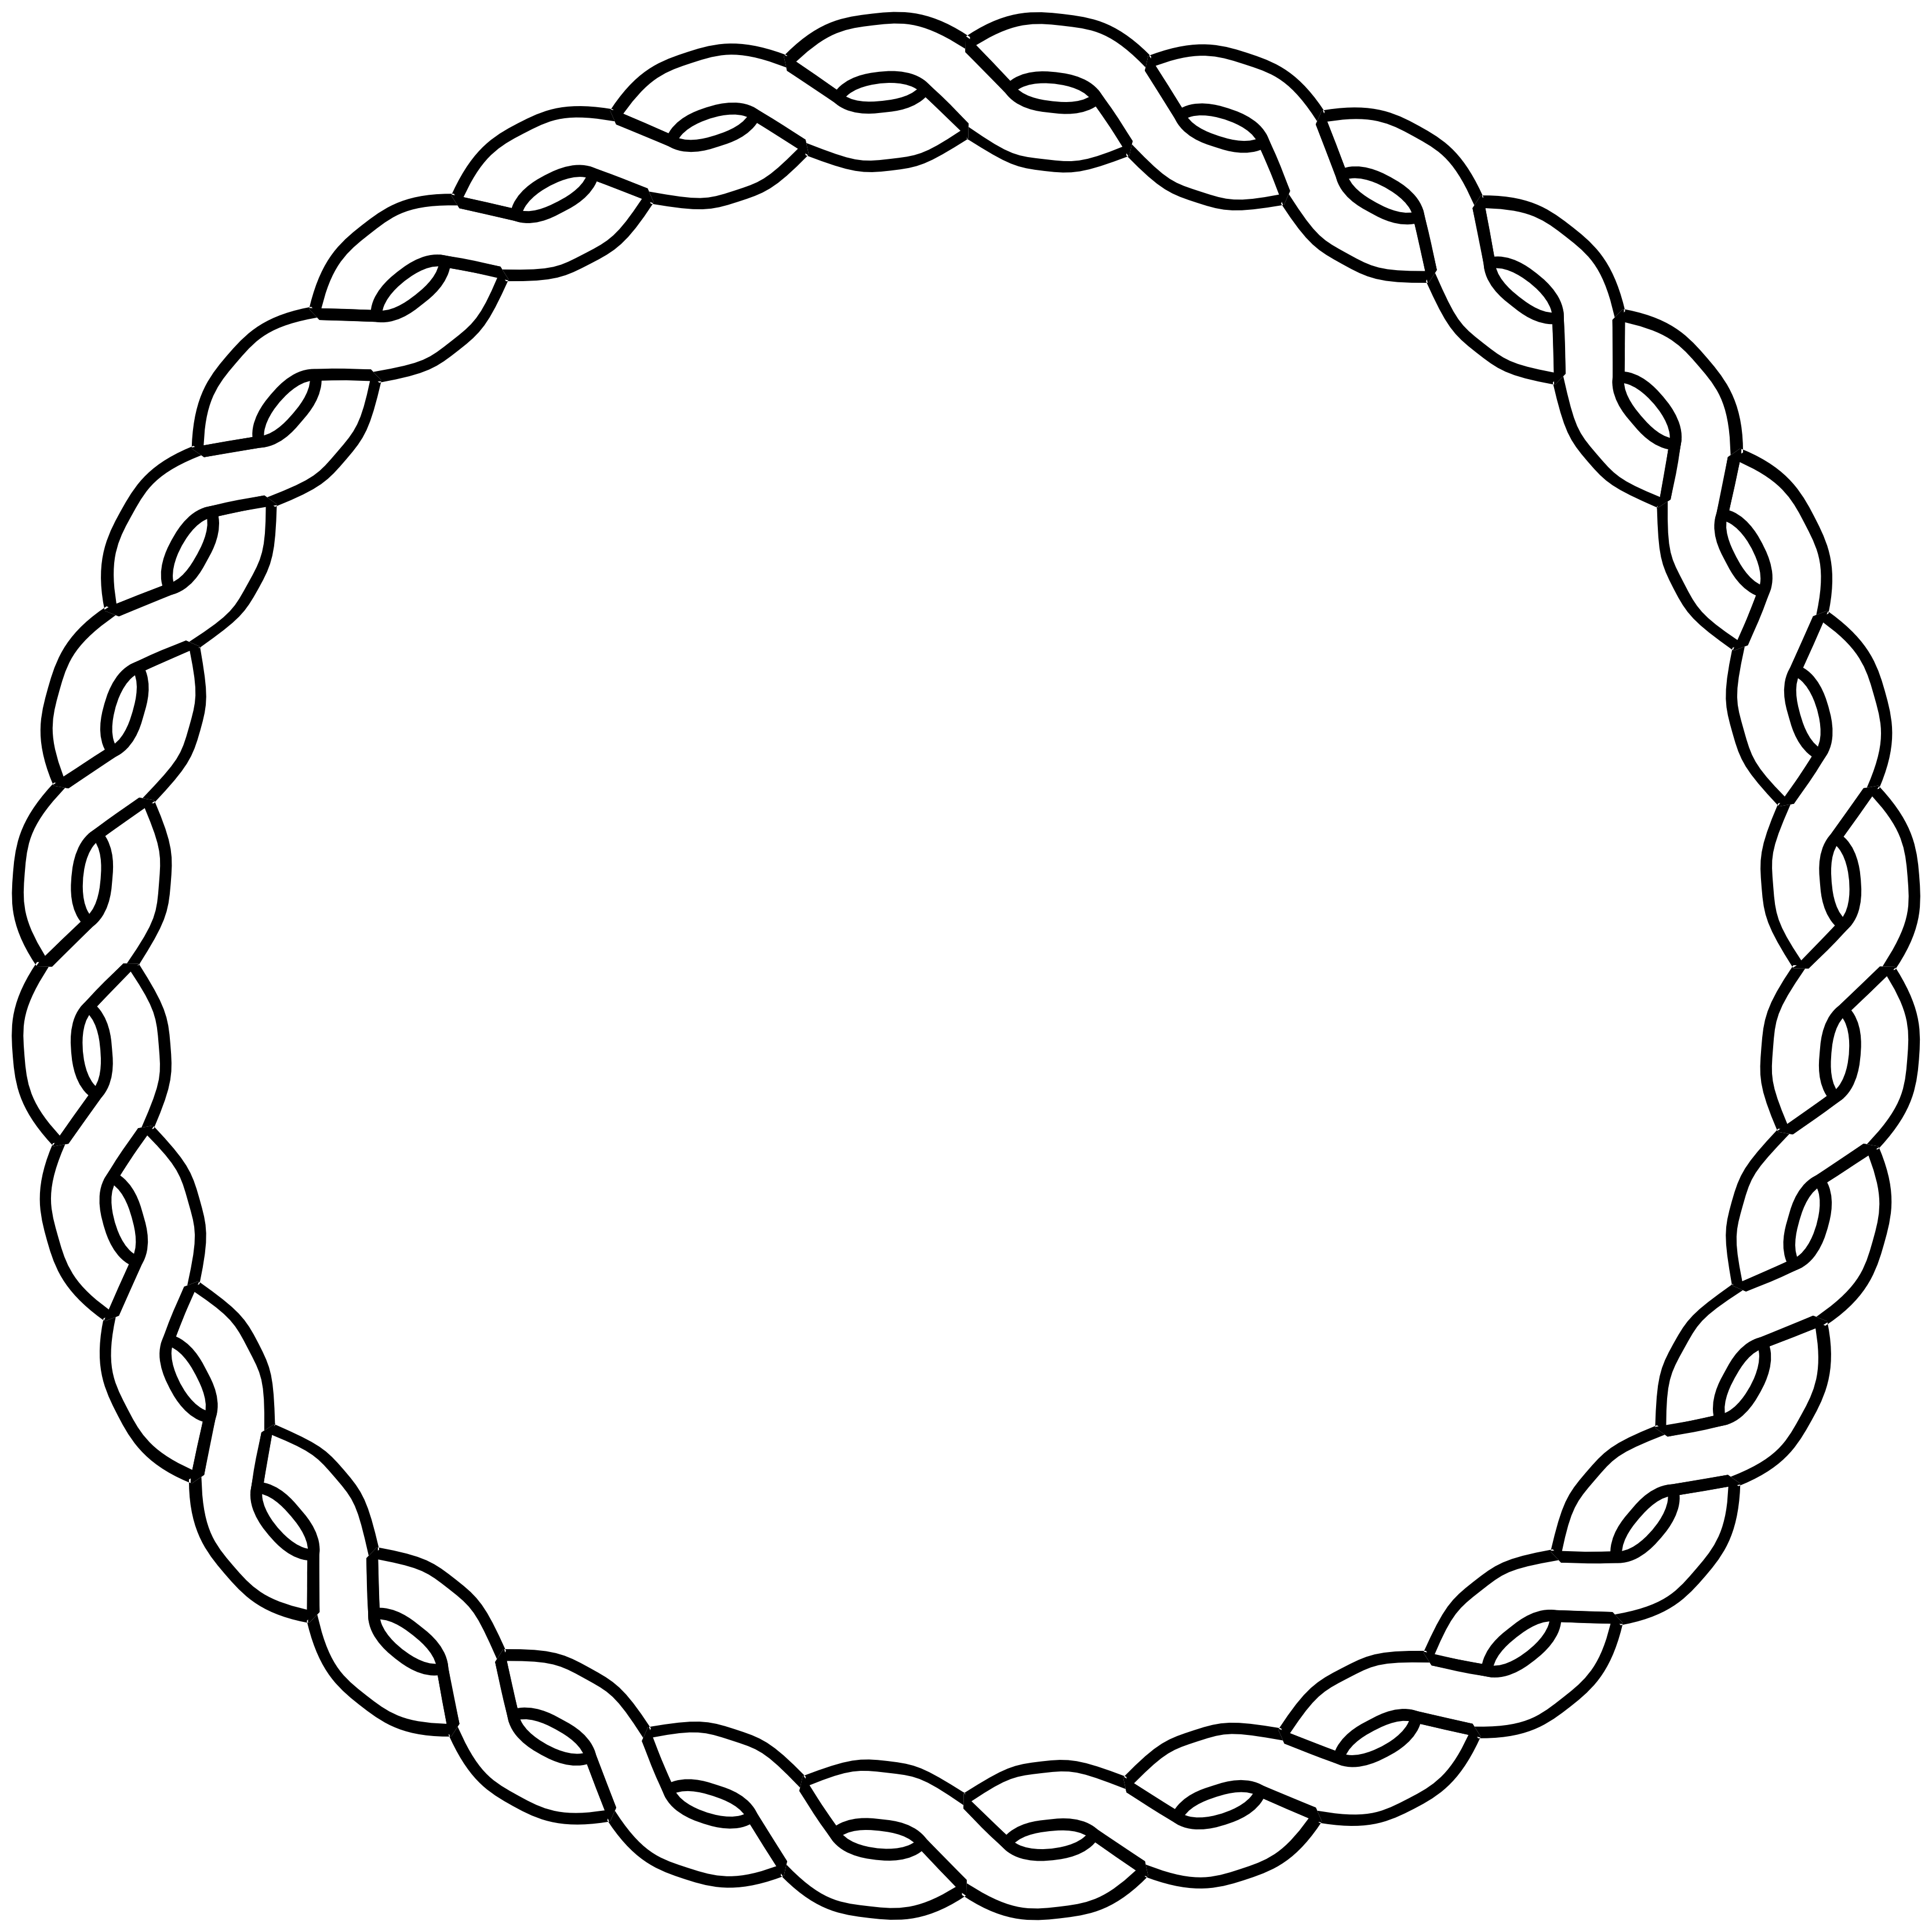 Clipart designs oval. Free circle border cliparts